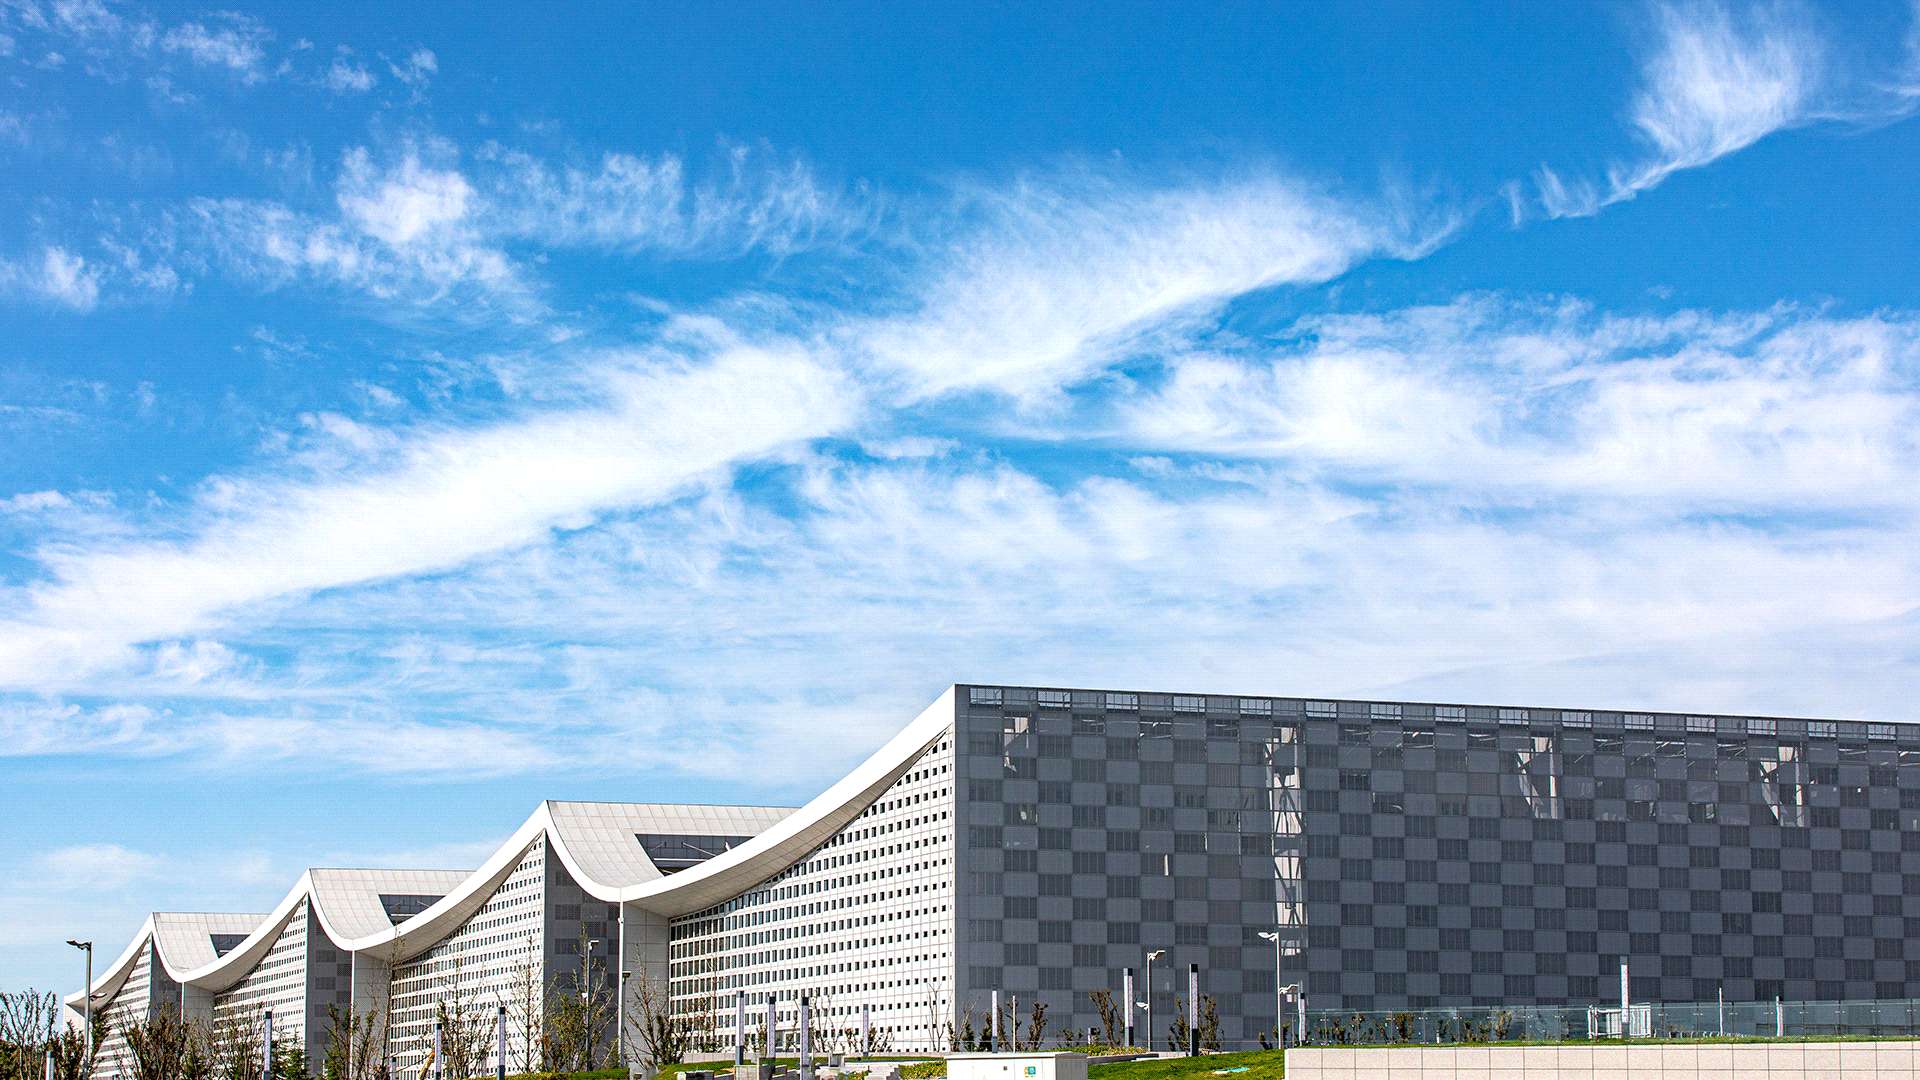 Weihai International Economic and trade exchange center promotes the innovative development of Weihai Convention and exhibition industry